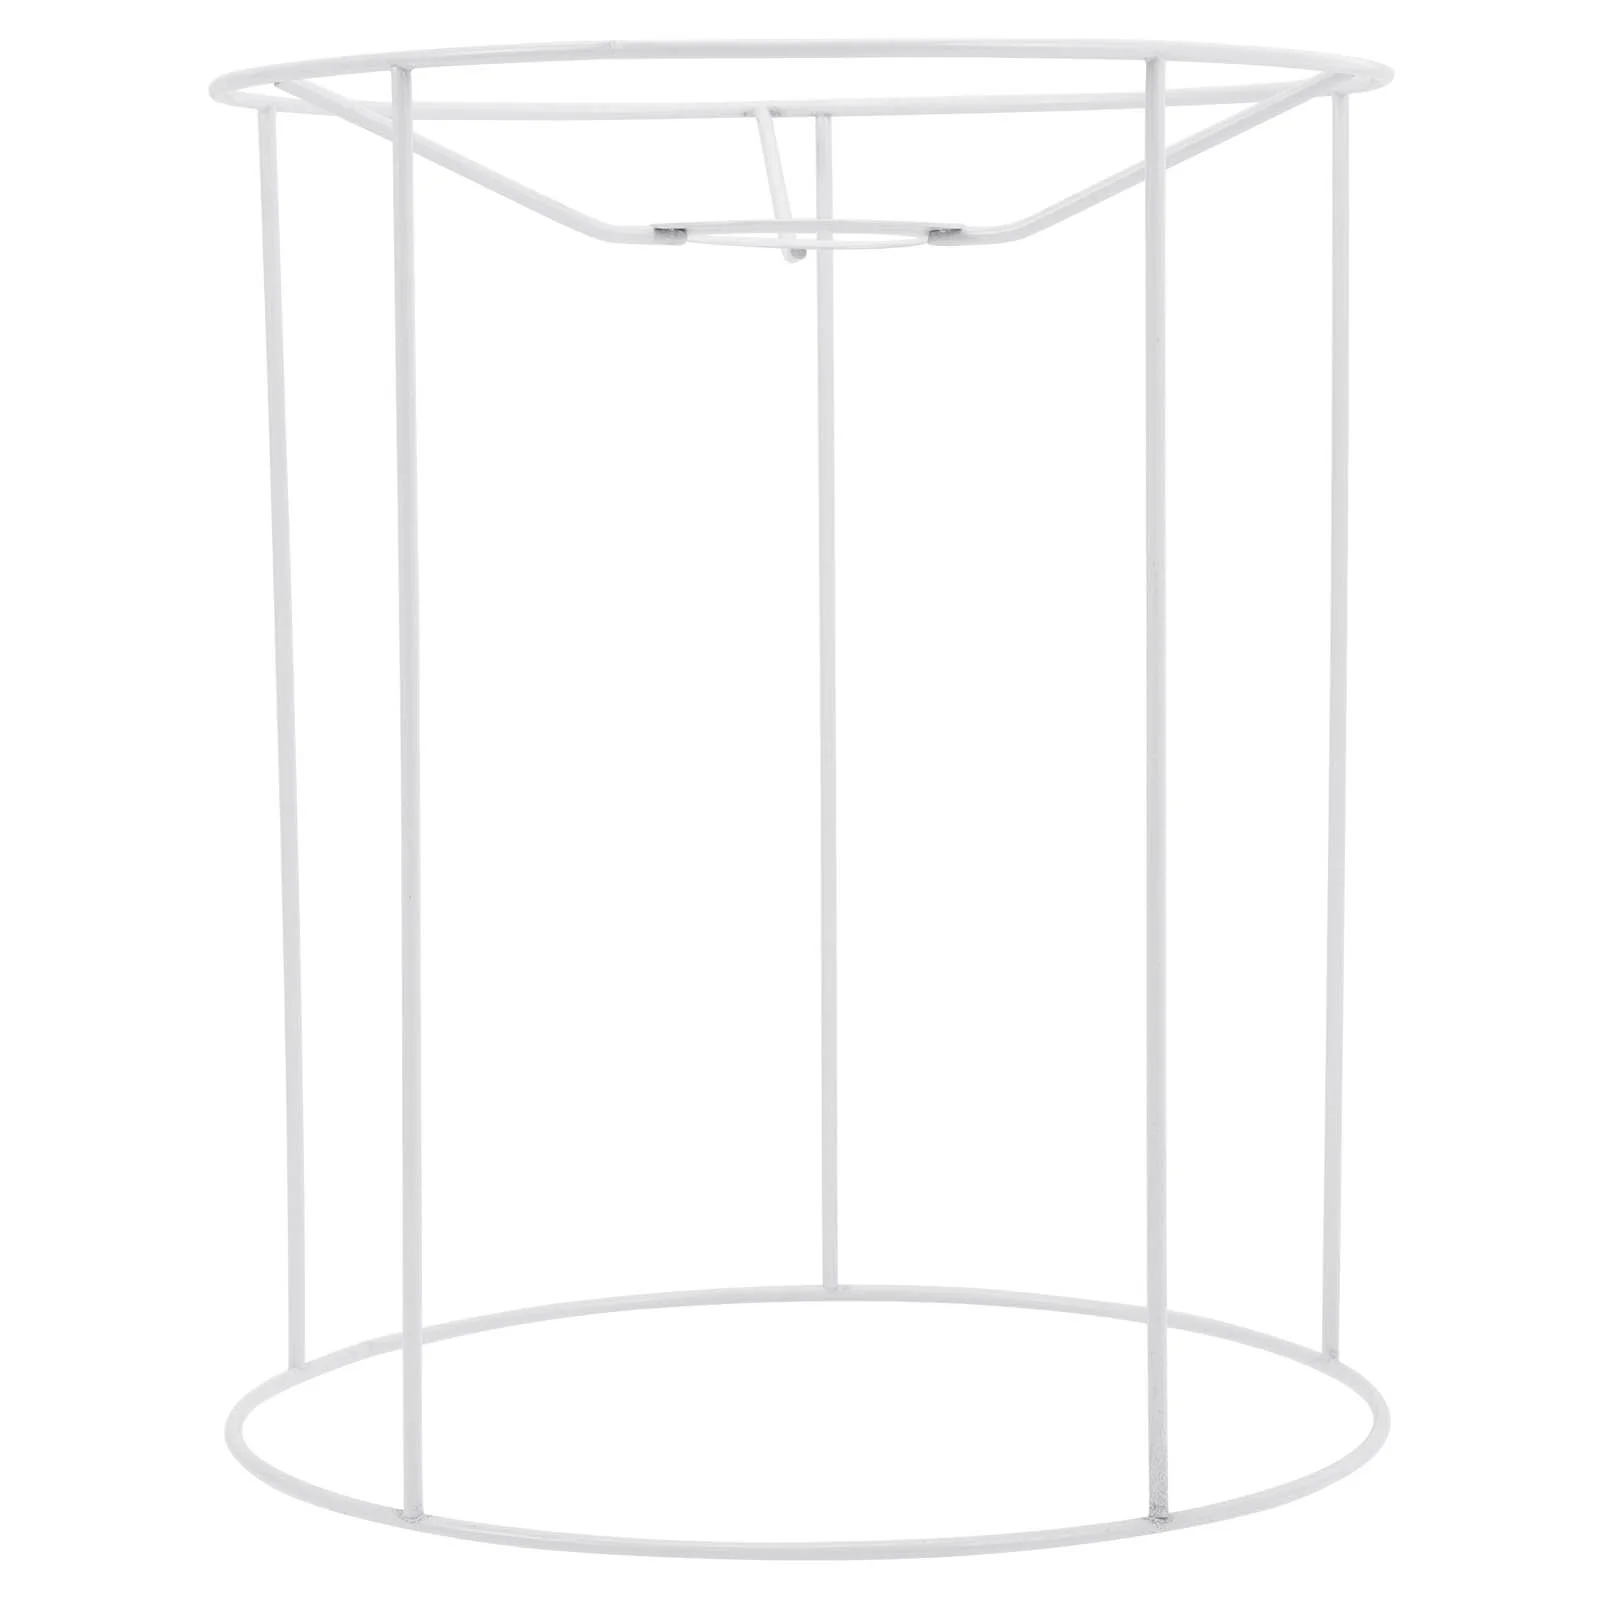 

Wire Light Cage Guard Wrought Iron Lampshade Holder Light Rack Making Supply Lamp Shade Tool Metal Hanging Frame White Table